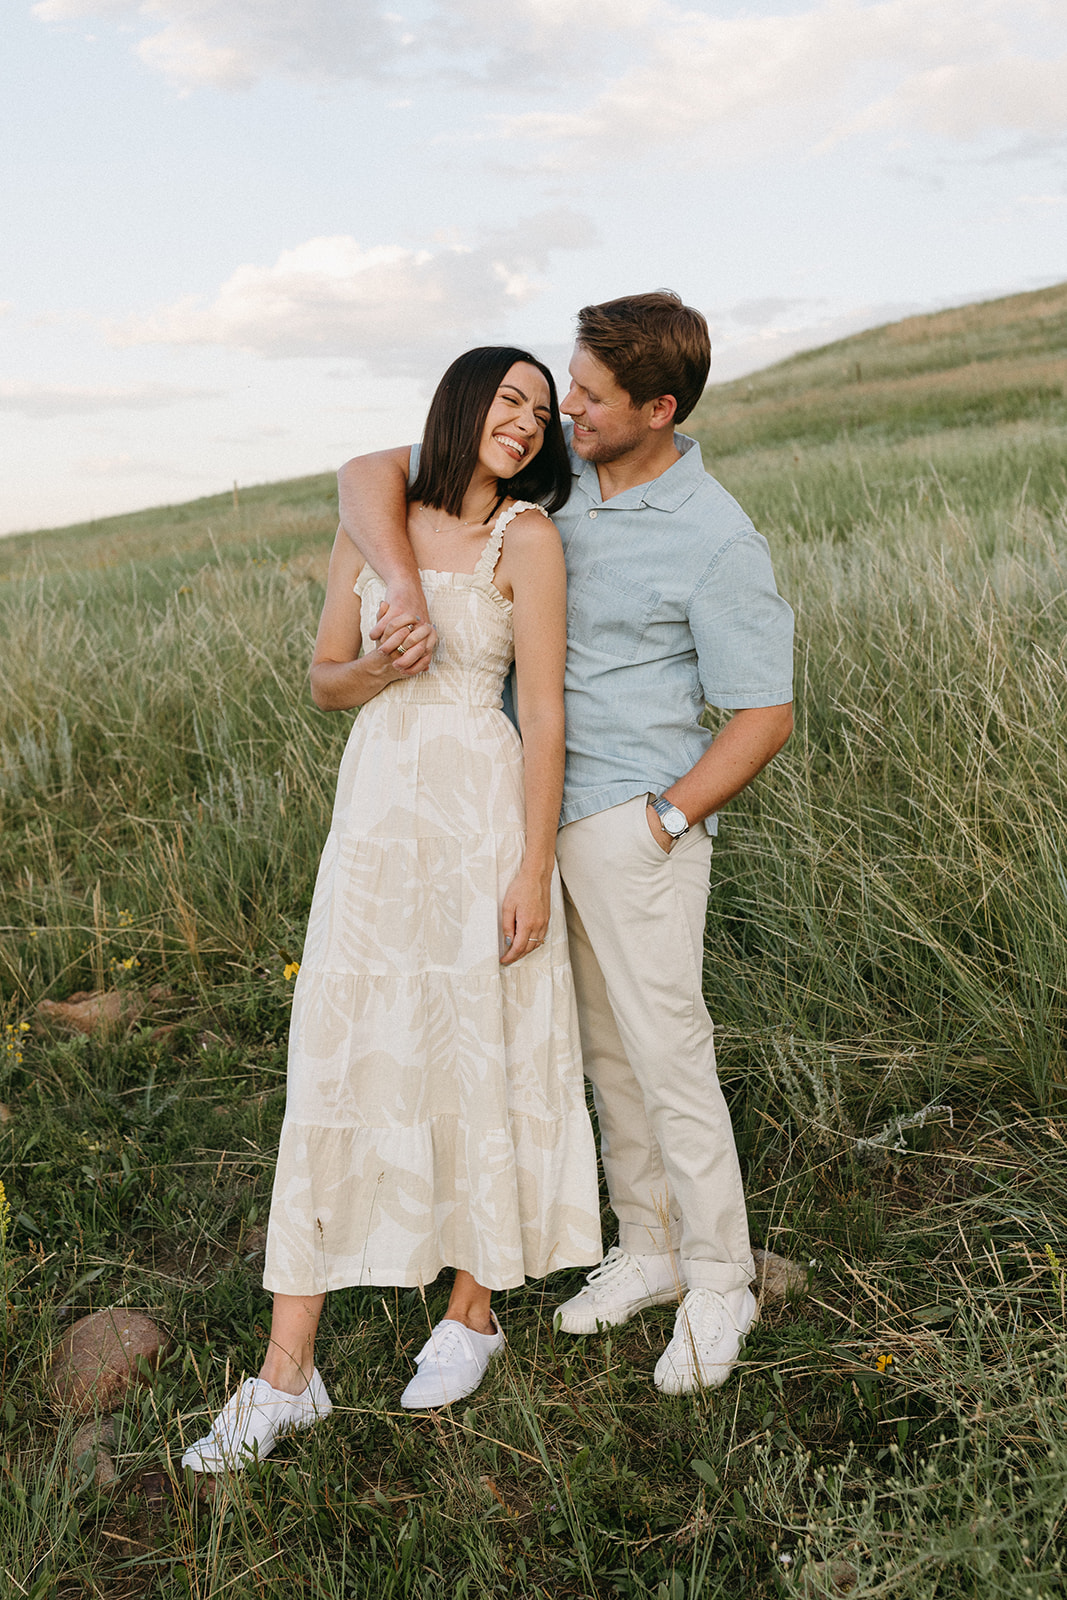 An editorial engagement couple embrace at Sunset in a wildflower meadow near The Flatirons in Boulder, Colorado